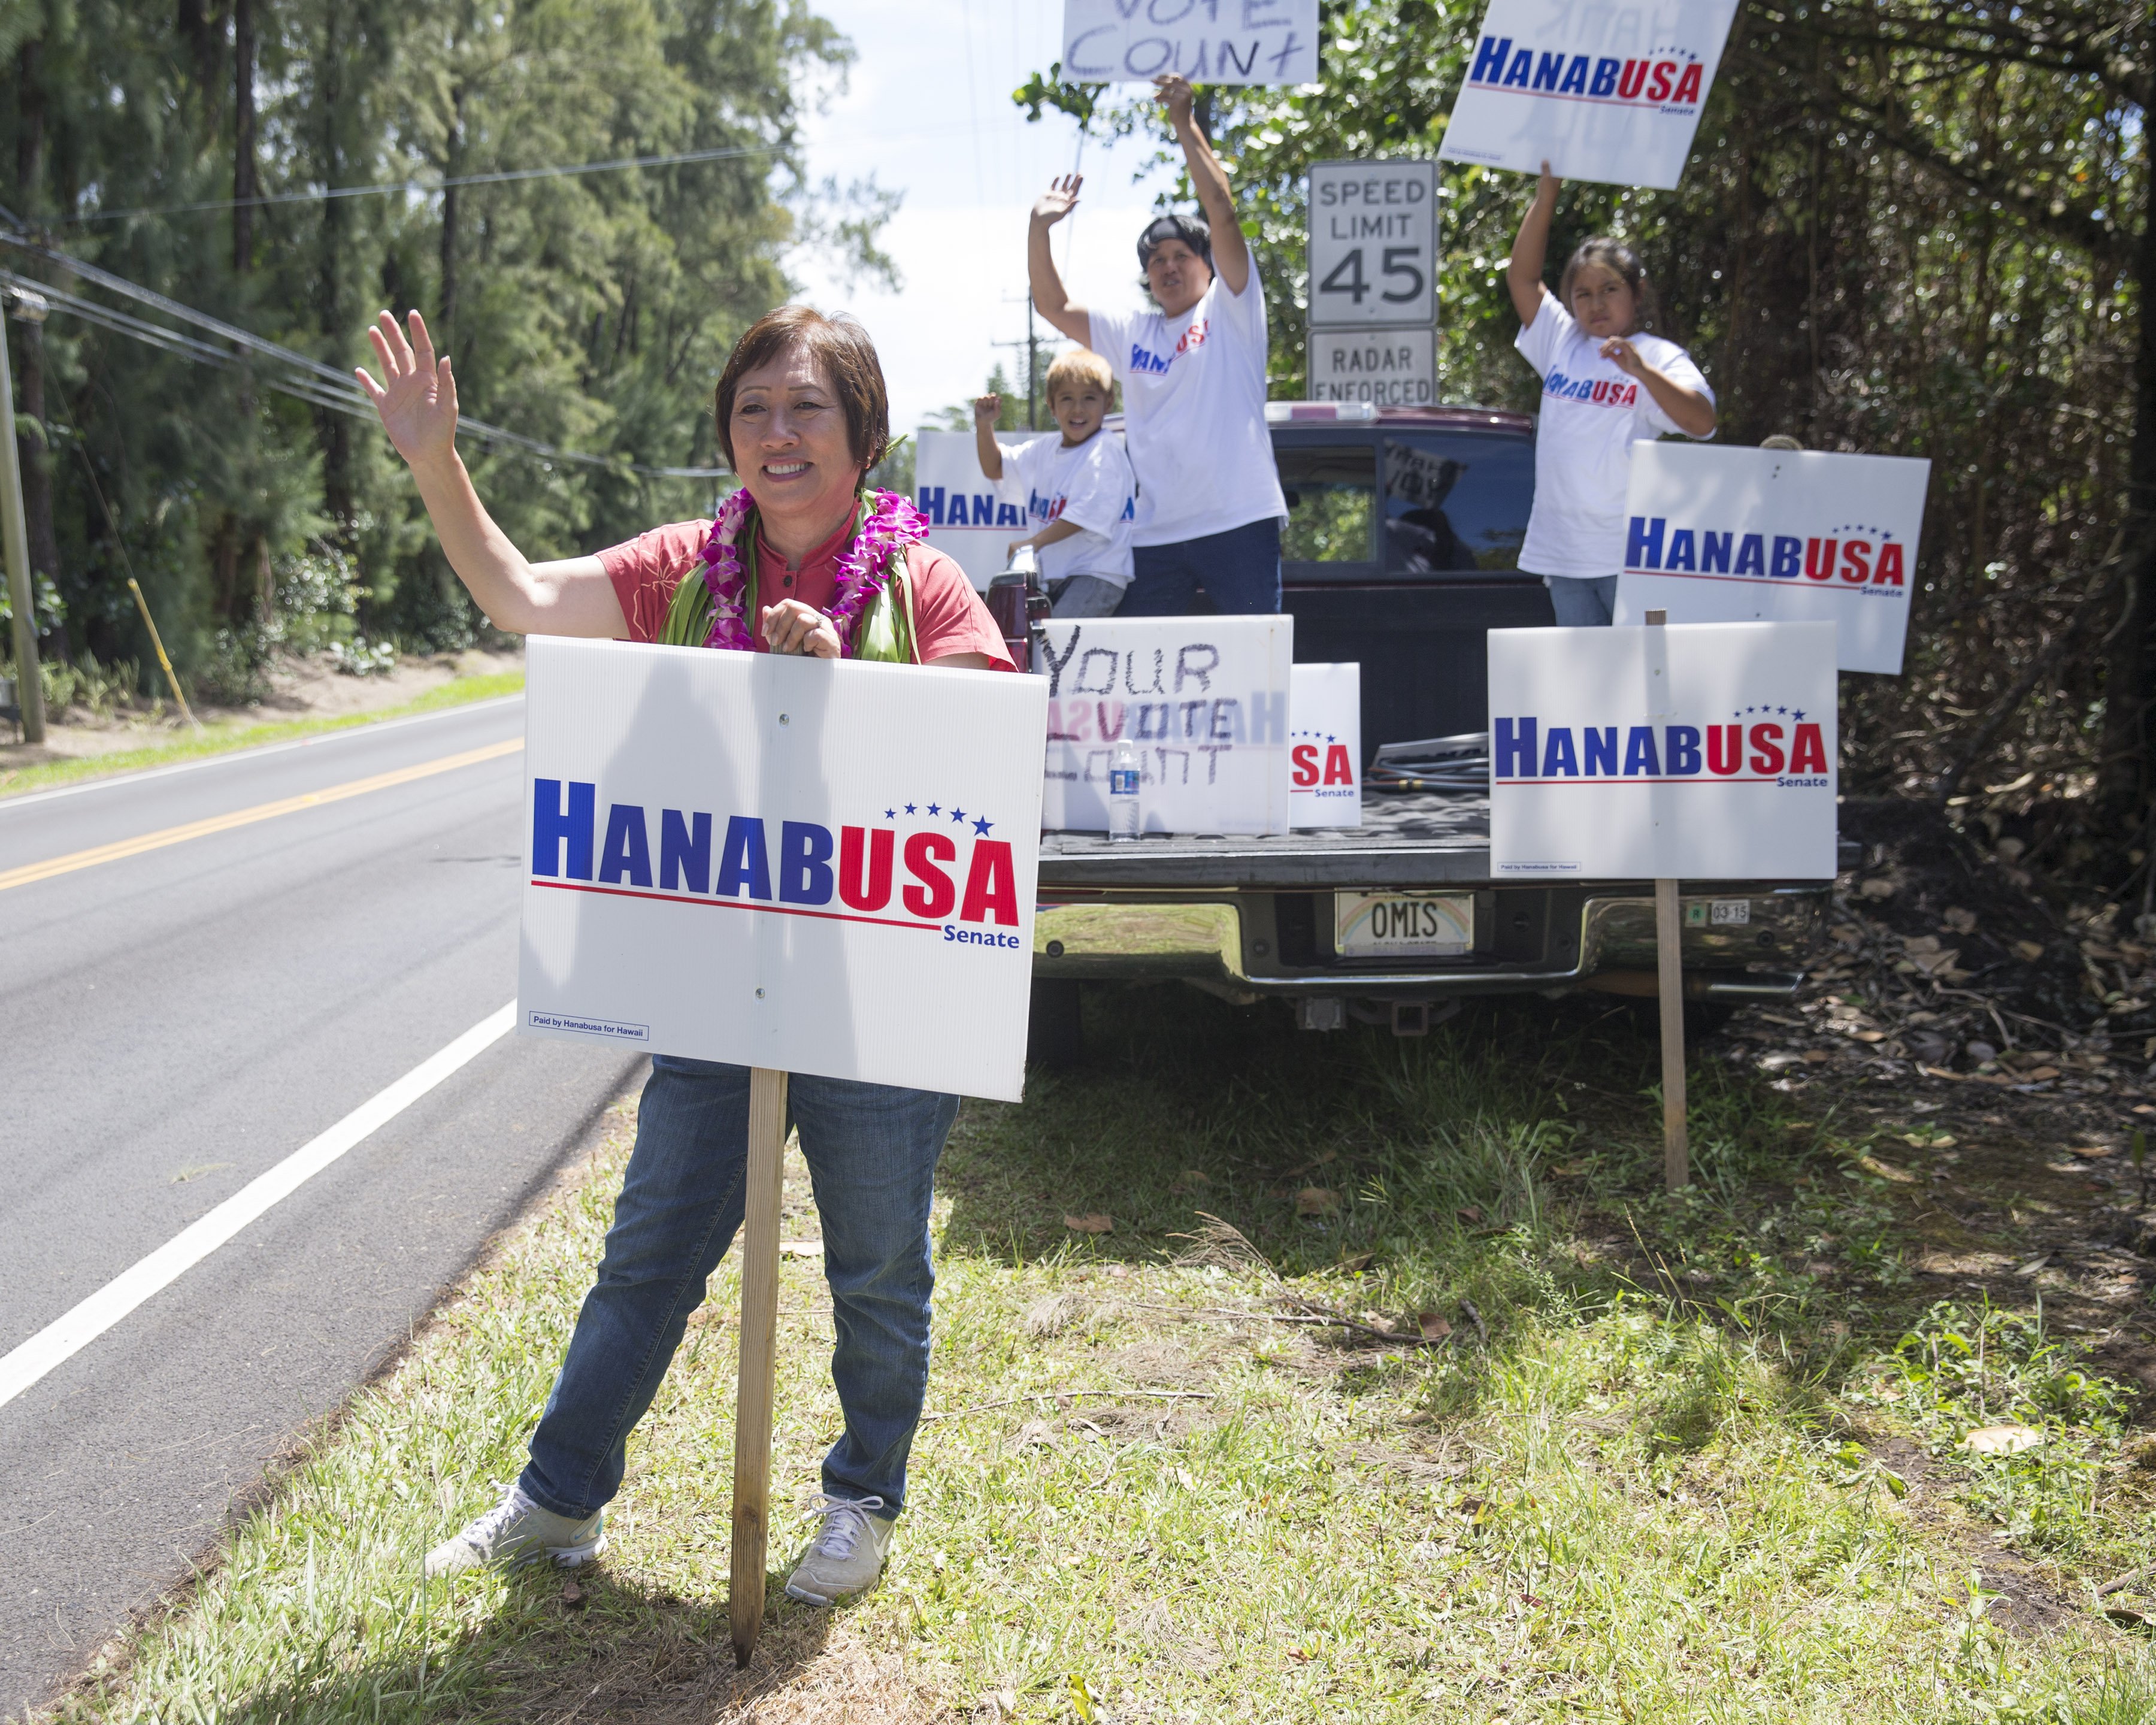 U.S. Rep. Colleen Hanabusa, left, and a group of supporters do some last minute campaigning near the polling place on Aug. 15, 2014, in Pahoa, Hawaii. (Marco Garcia—AP)